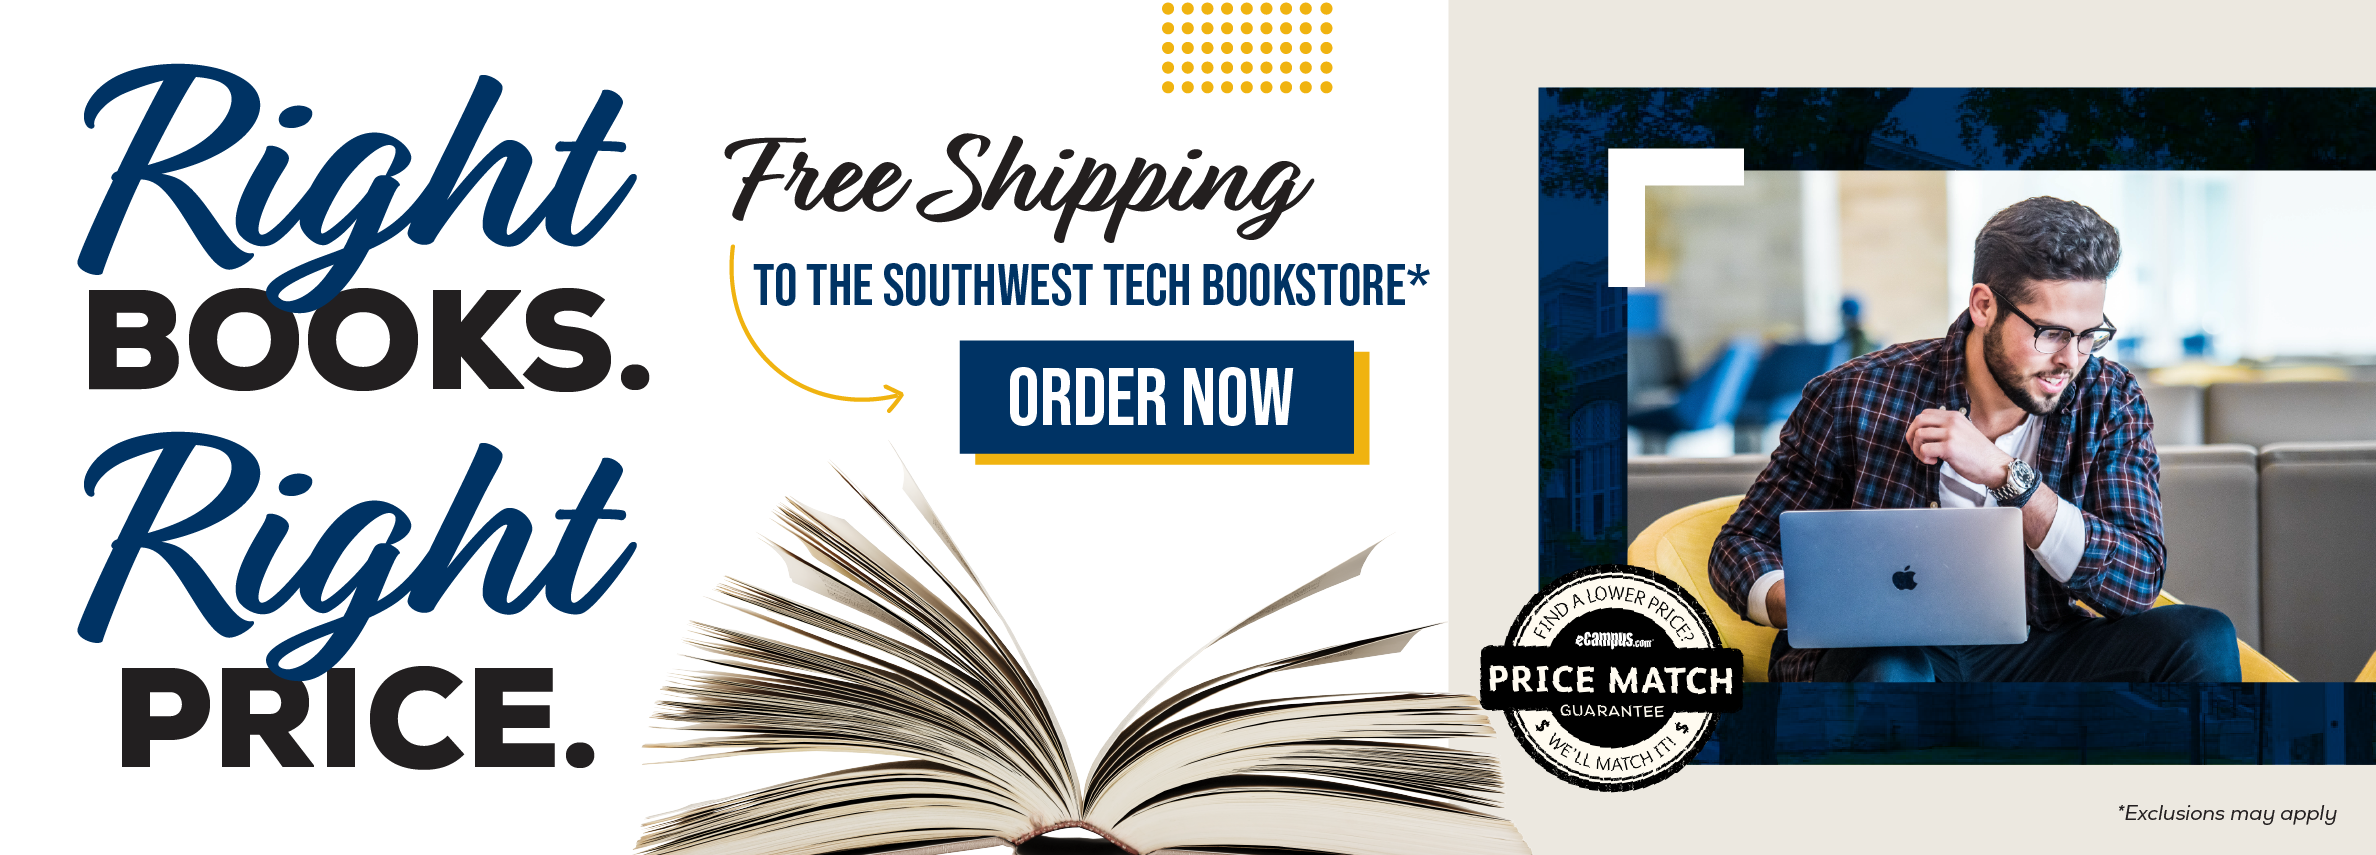 Right books. Right price. Free shipping to the Southwest Tech Bookstore.* Order now. Price Match Guarantee. *Exclusions may apply.